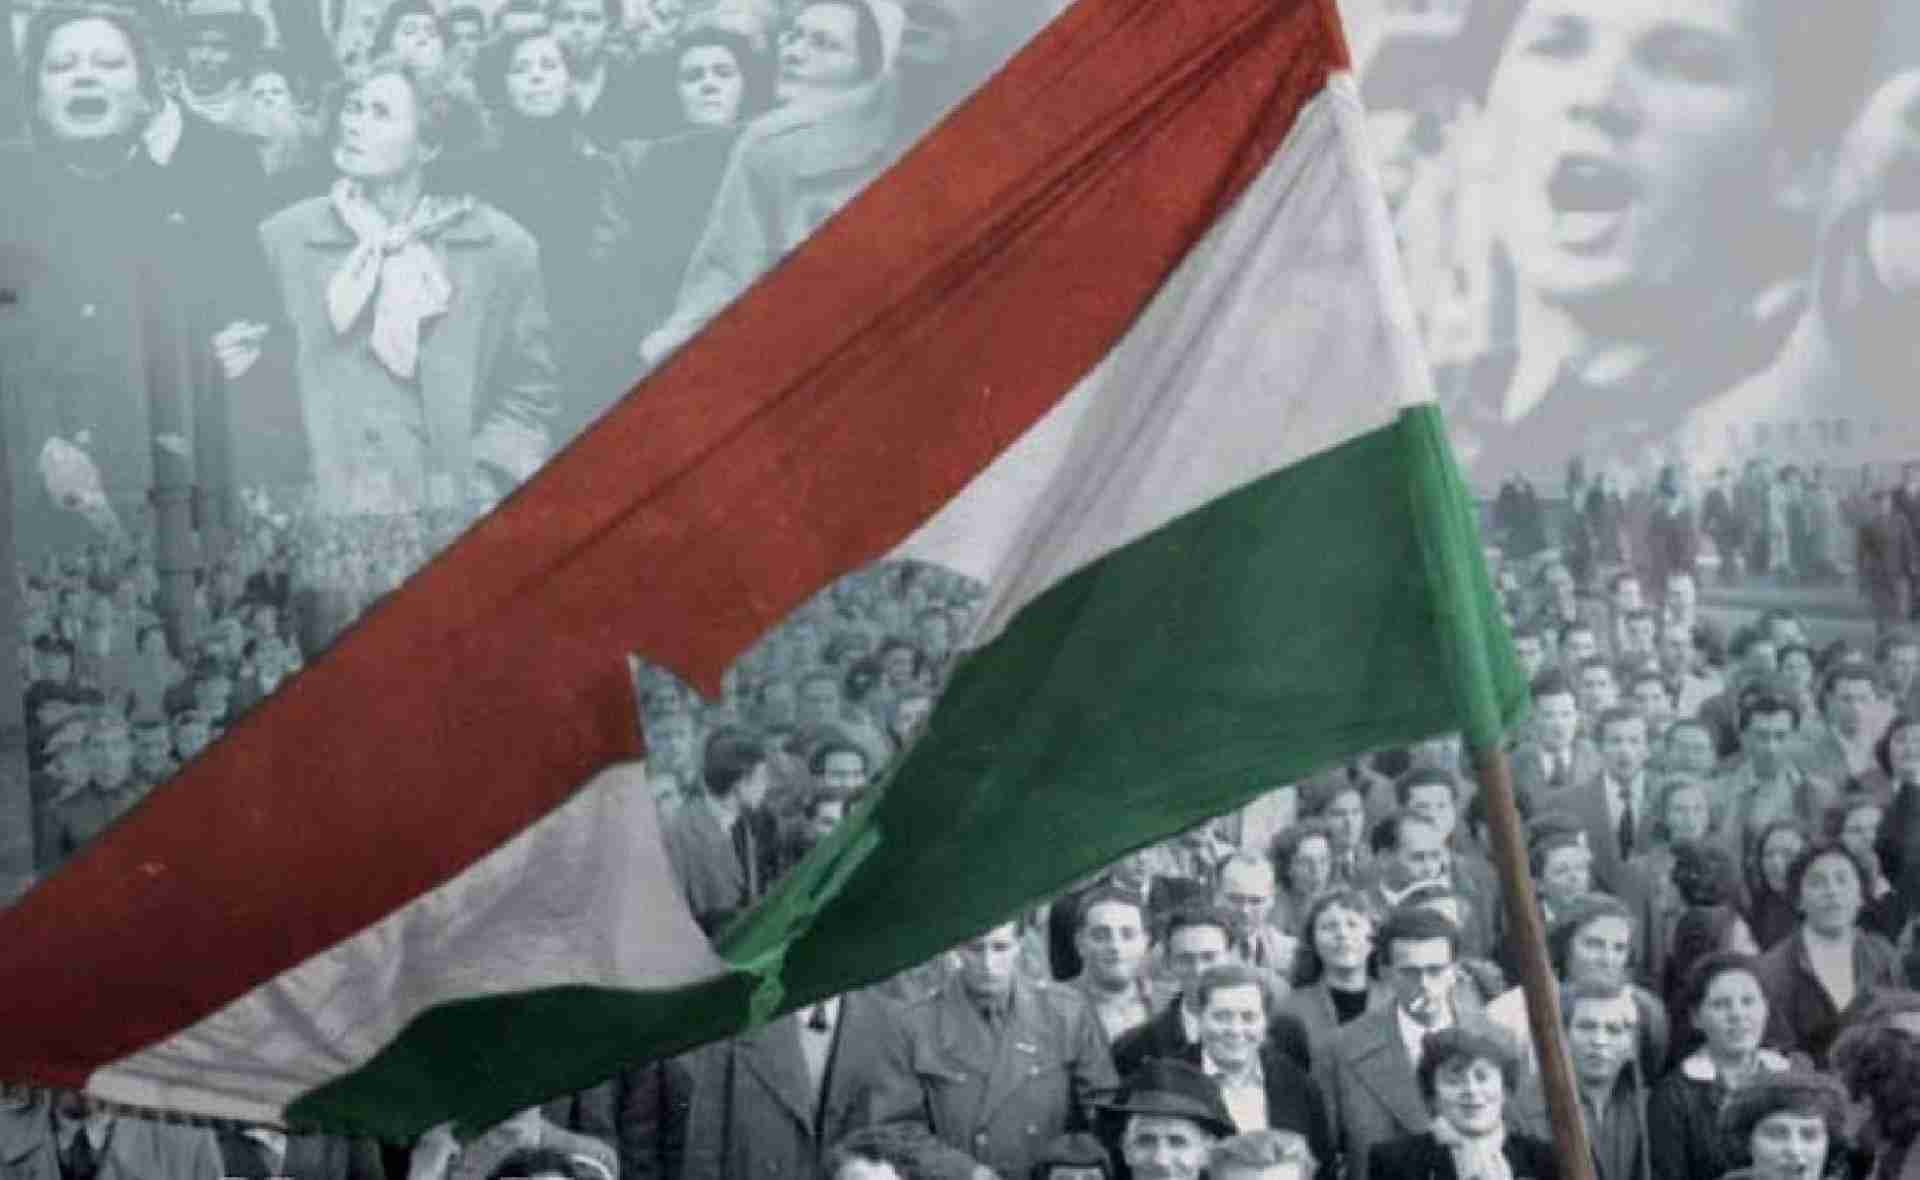 Commemoration of the Hungarian Revolution of 1956